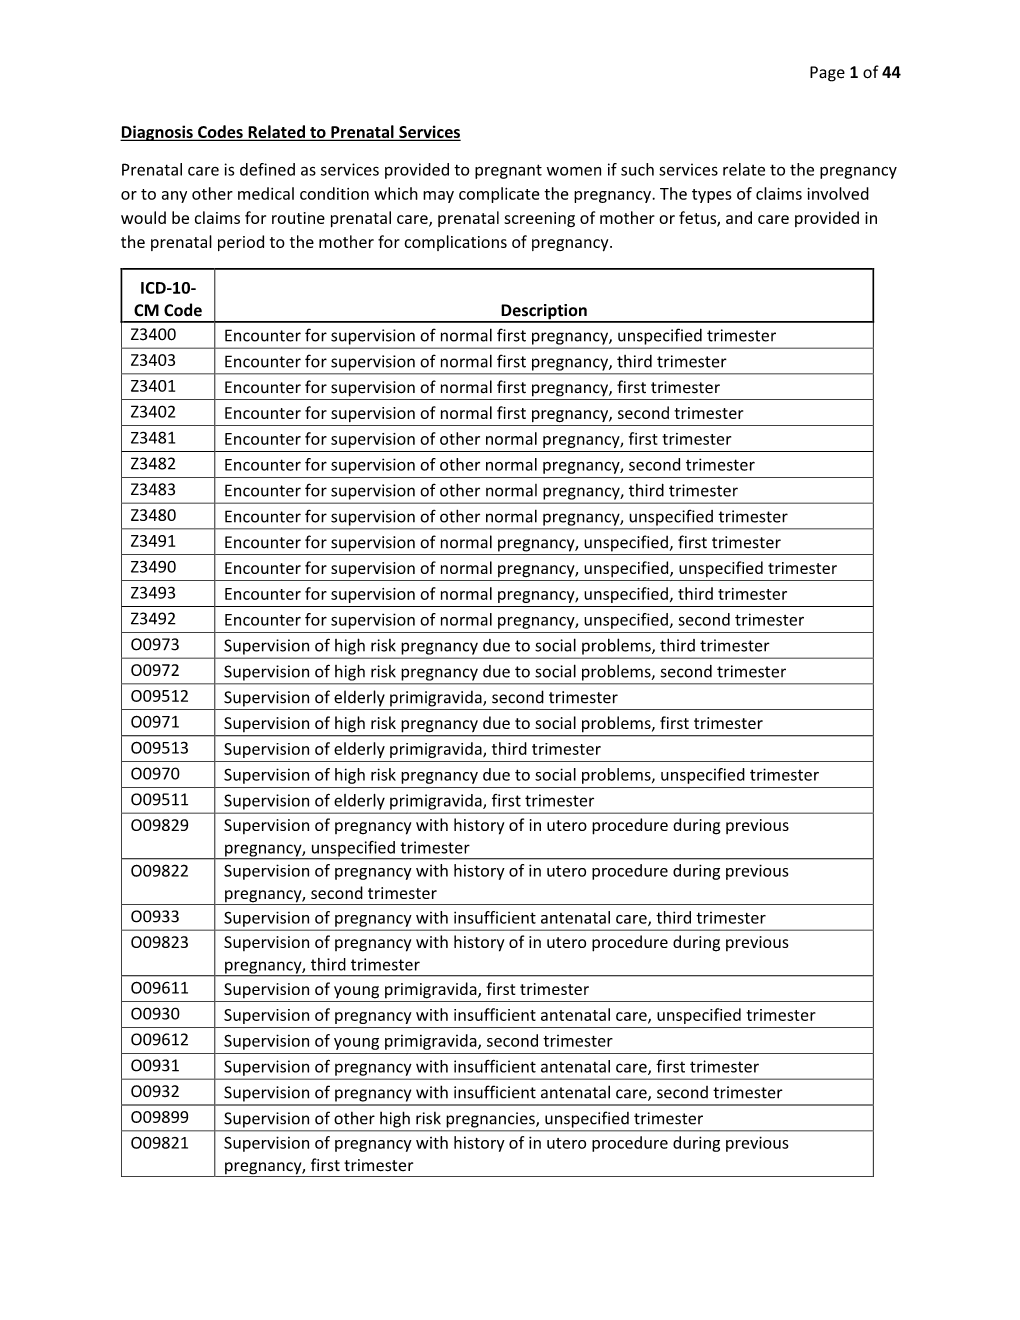 Page 1 of 44 Diagnosis Codes Related to Prenatal Services